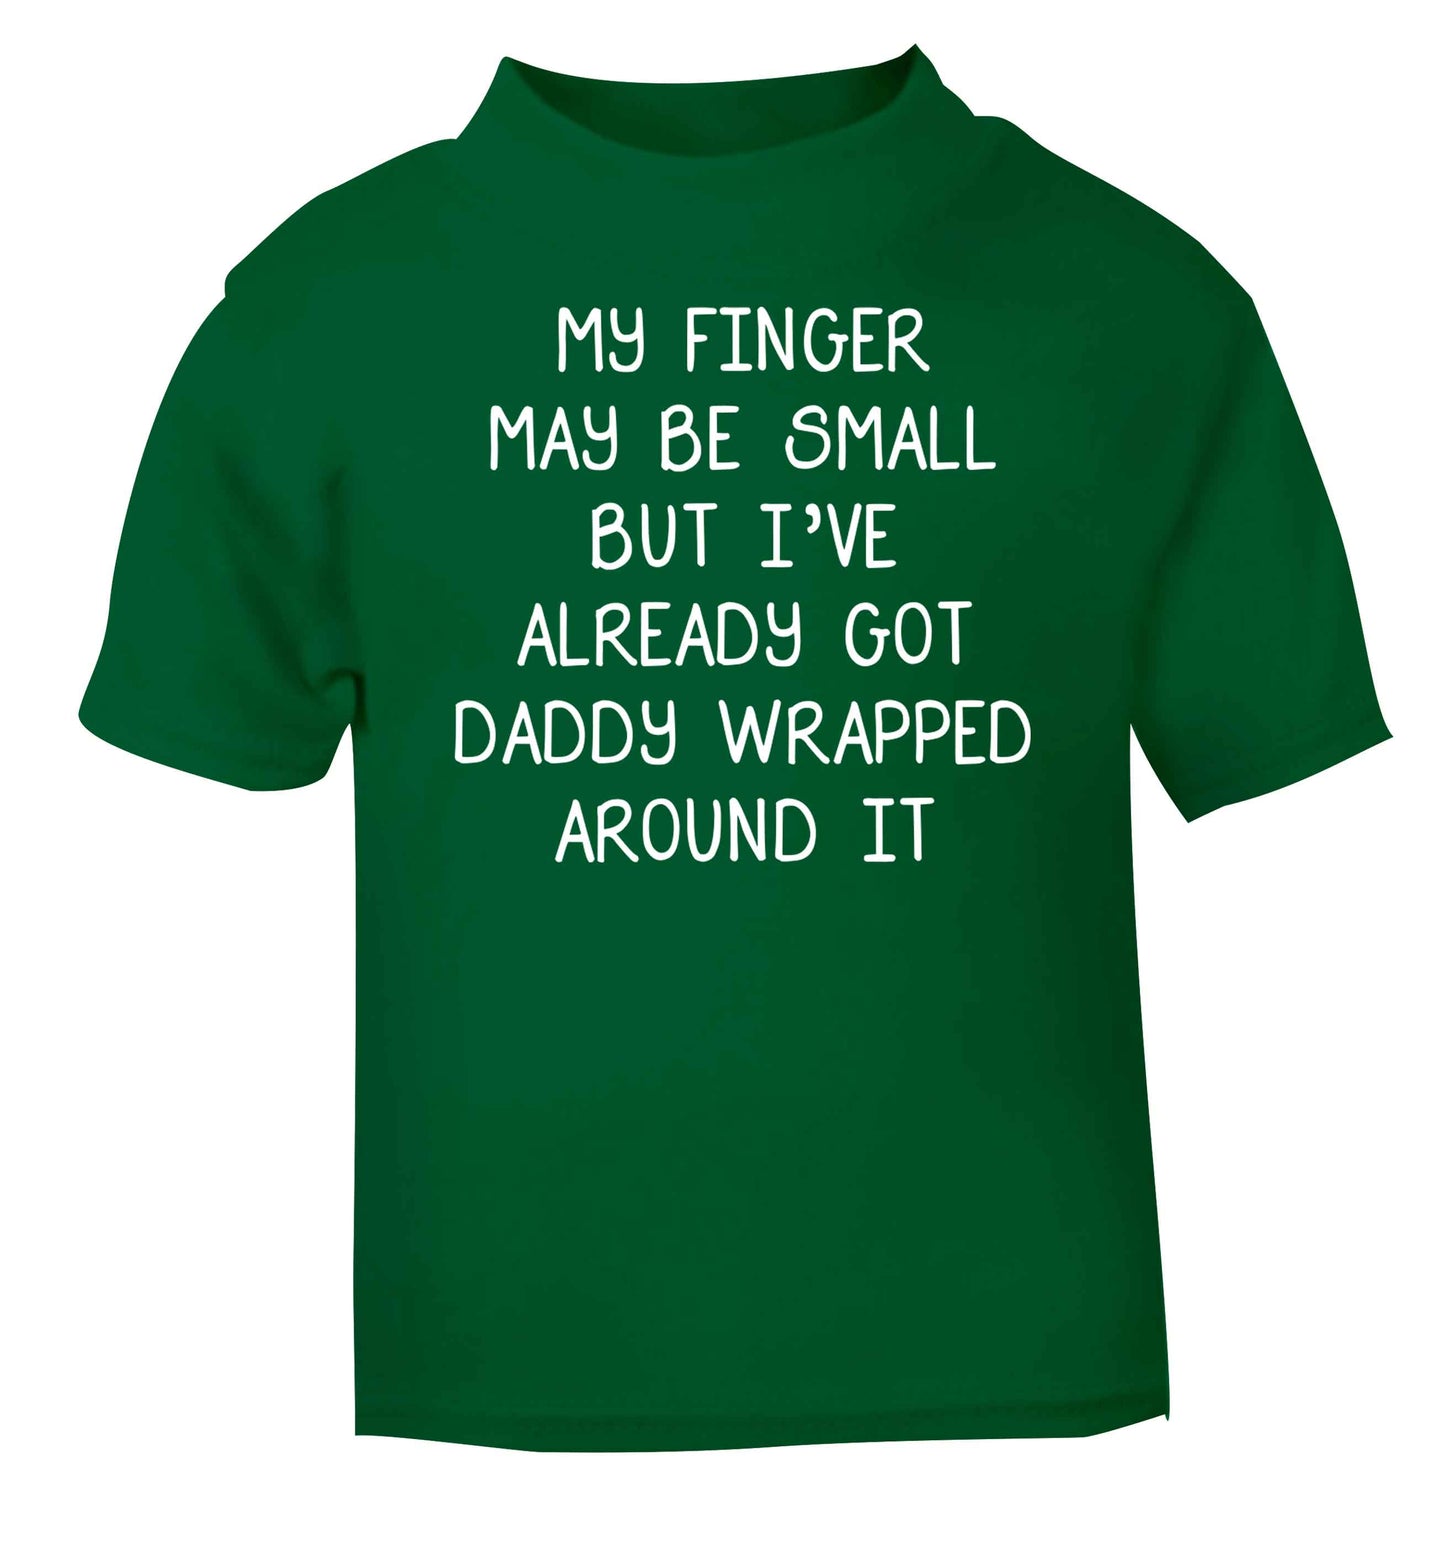 My finger may be small but I've already got daddy wrapped around it green baby toddler Tshirt 2 Years